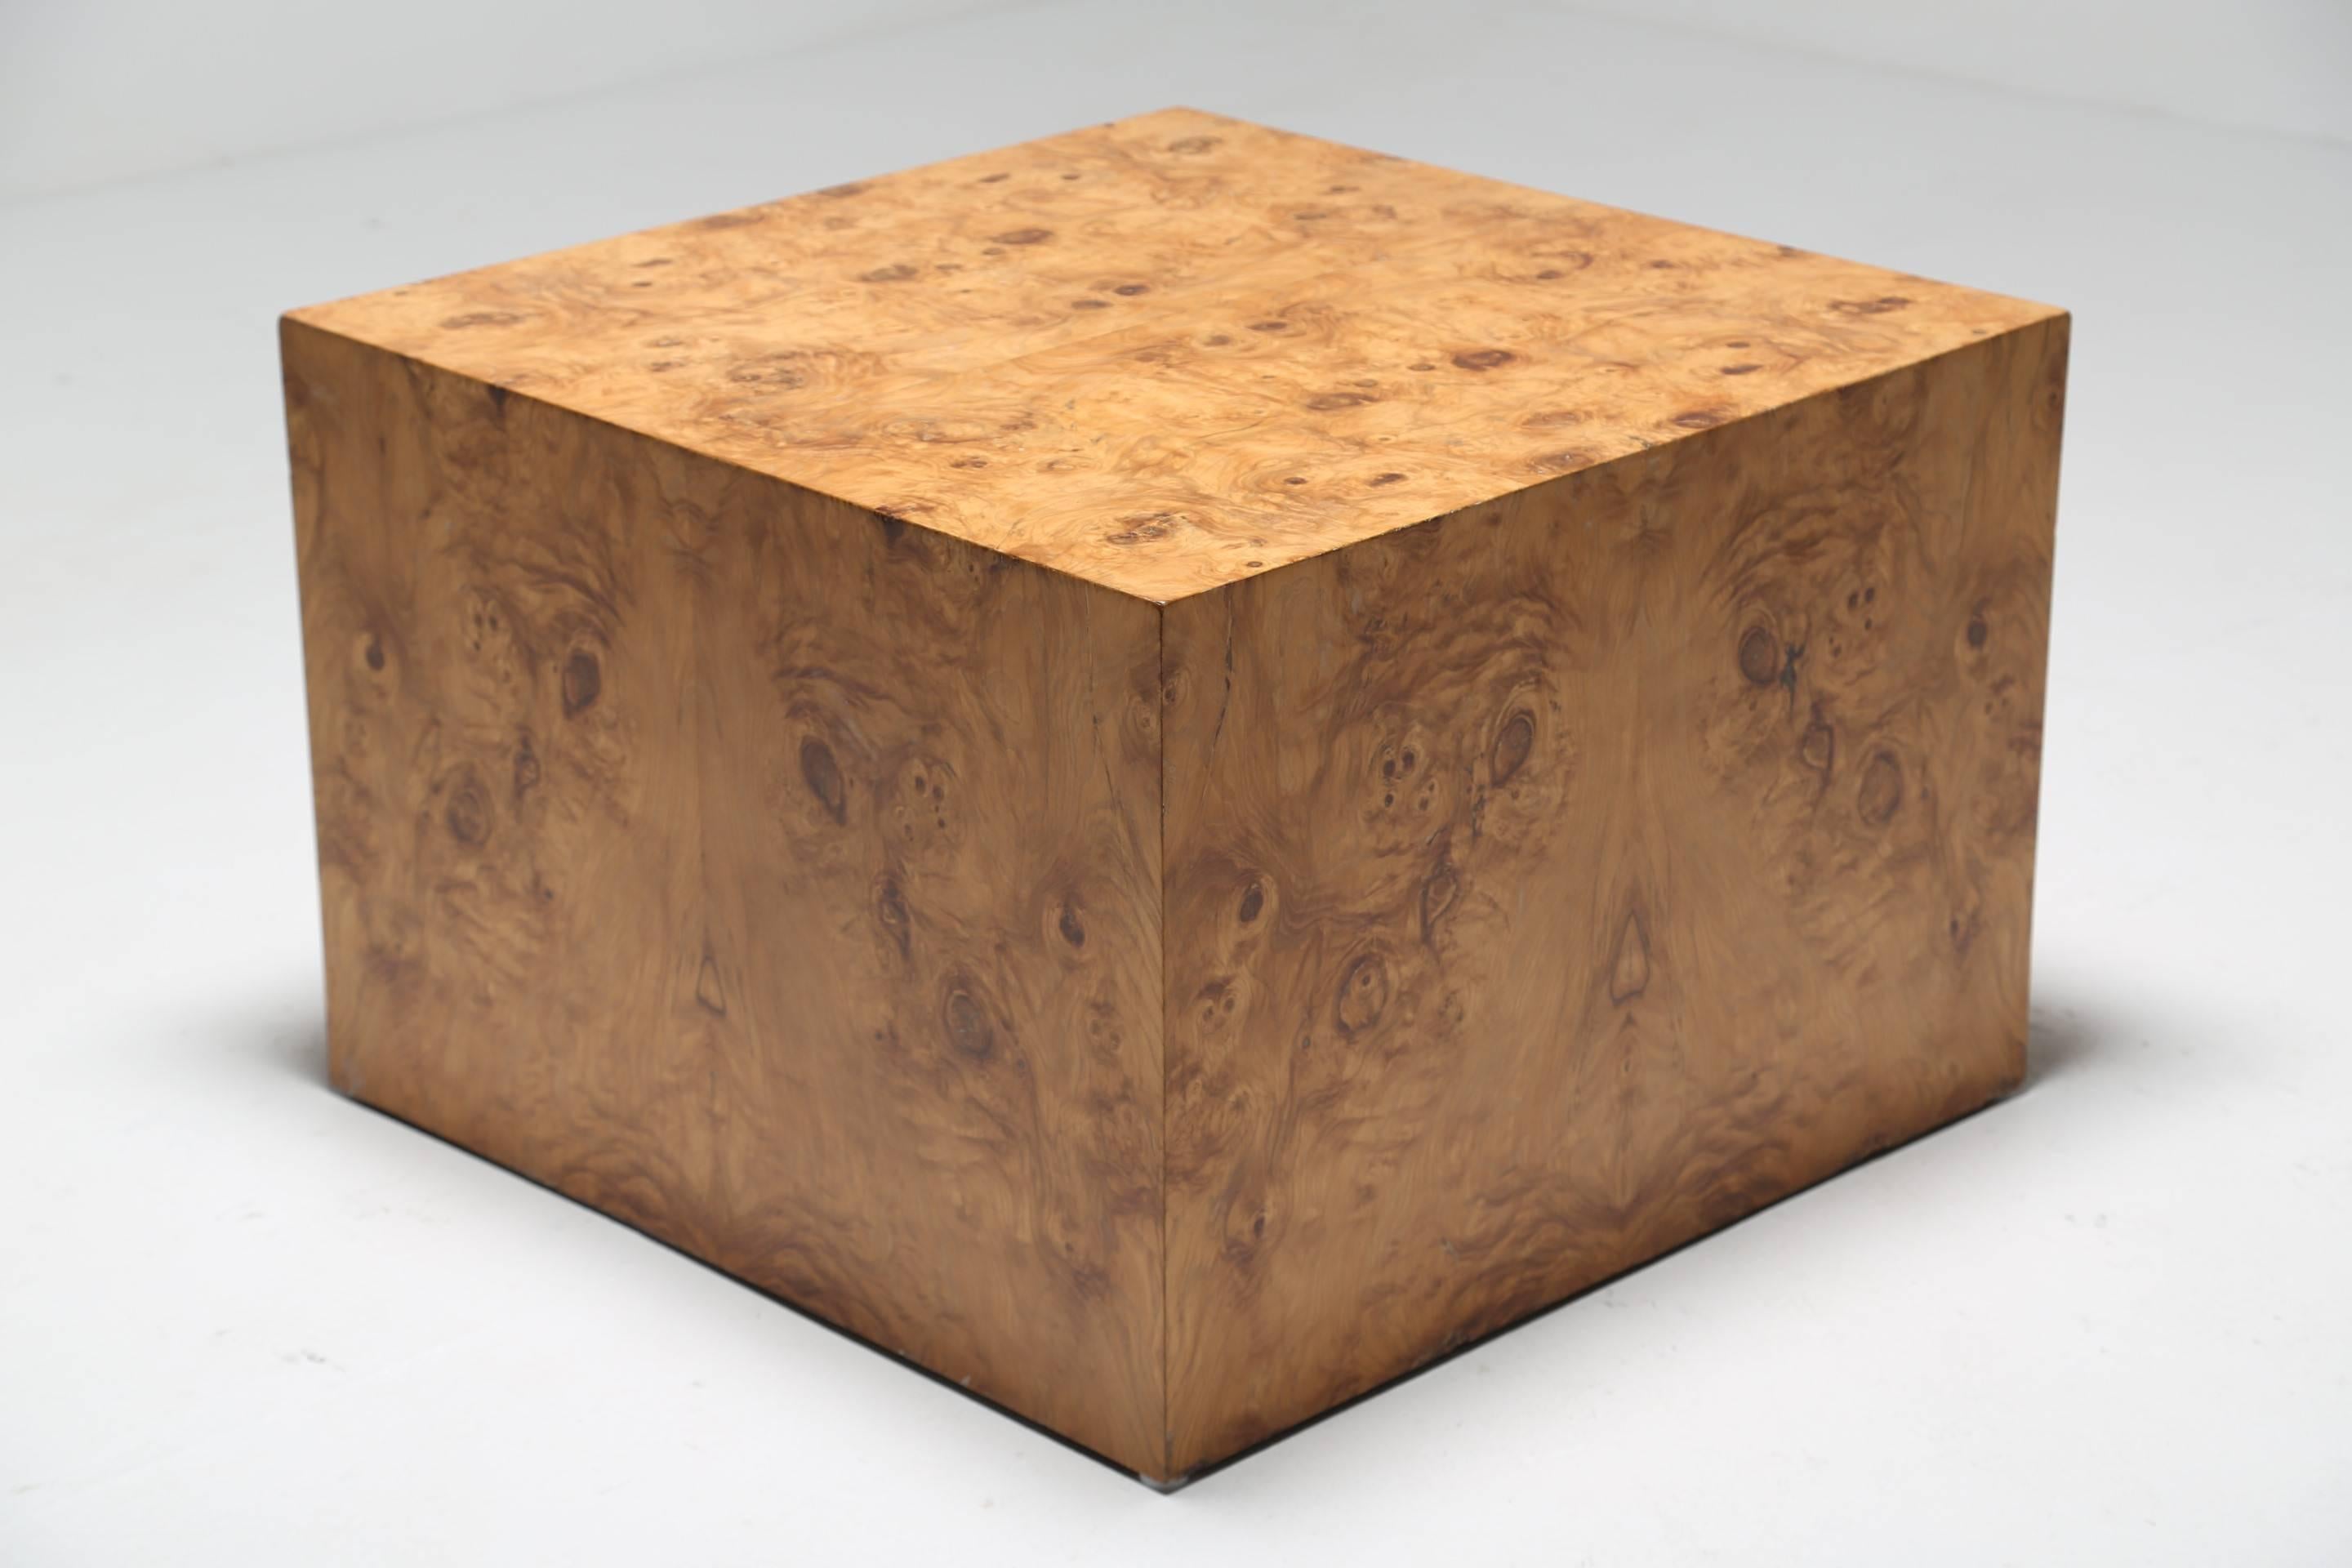 A large size Pace Collection burl wood cube end table. Originally purchased at the same time as a Pace Collection credenza and from the same shop so therefore thought to be by Pace Collection. We have photographed this table with a chair on top to